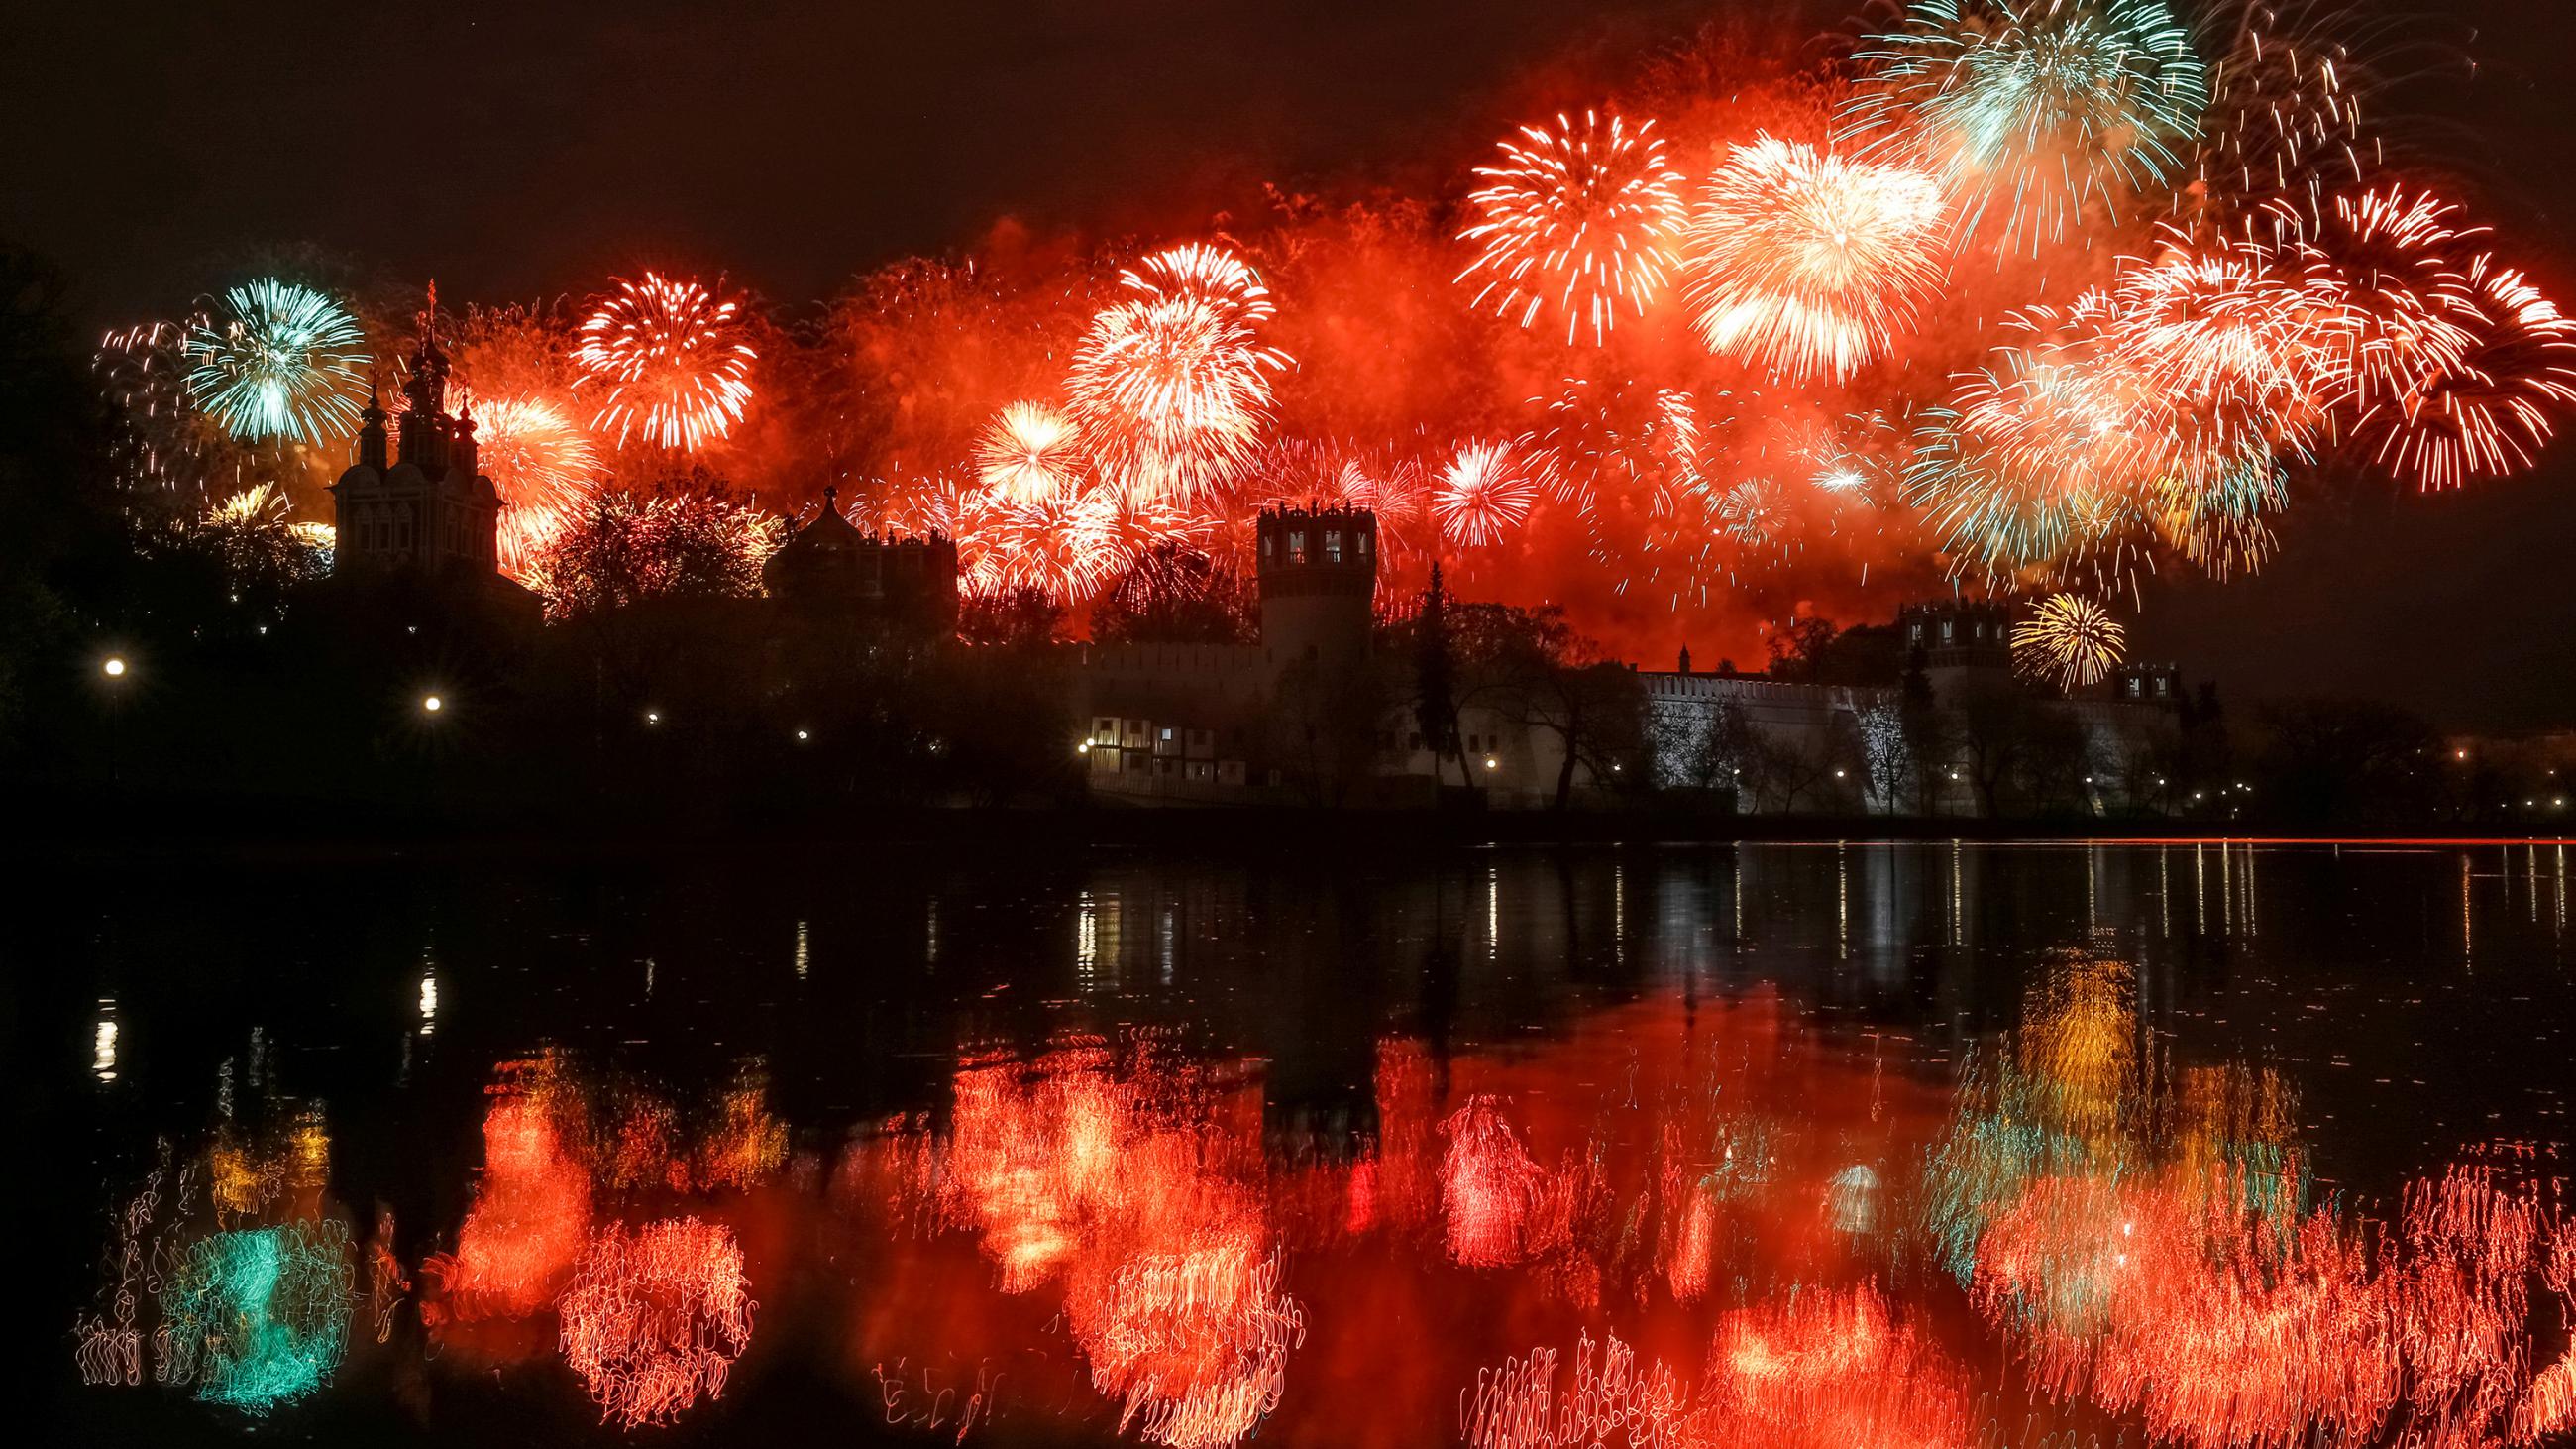 This is a striking photo showing a huge number of fireworks exploding behind a magnificent monastery and reflected on the river facing the camera. 